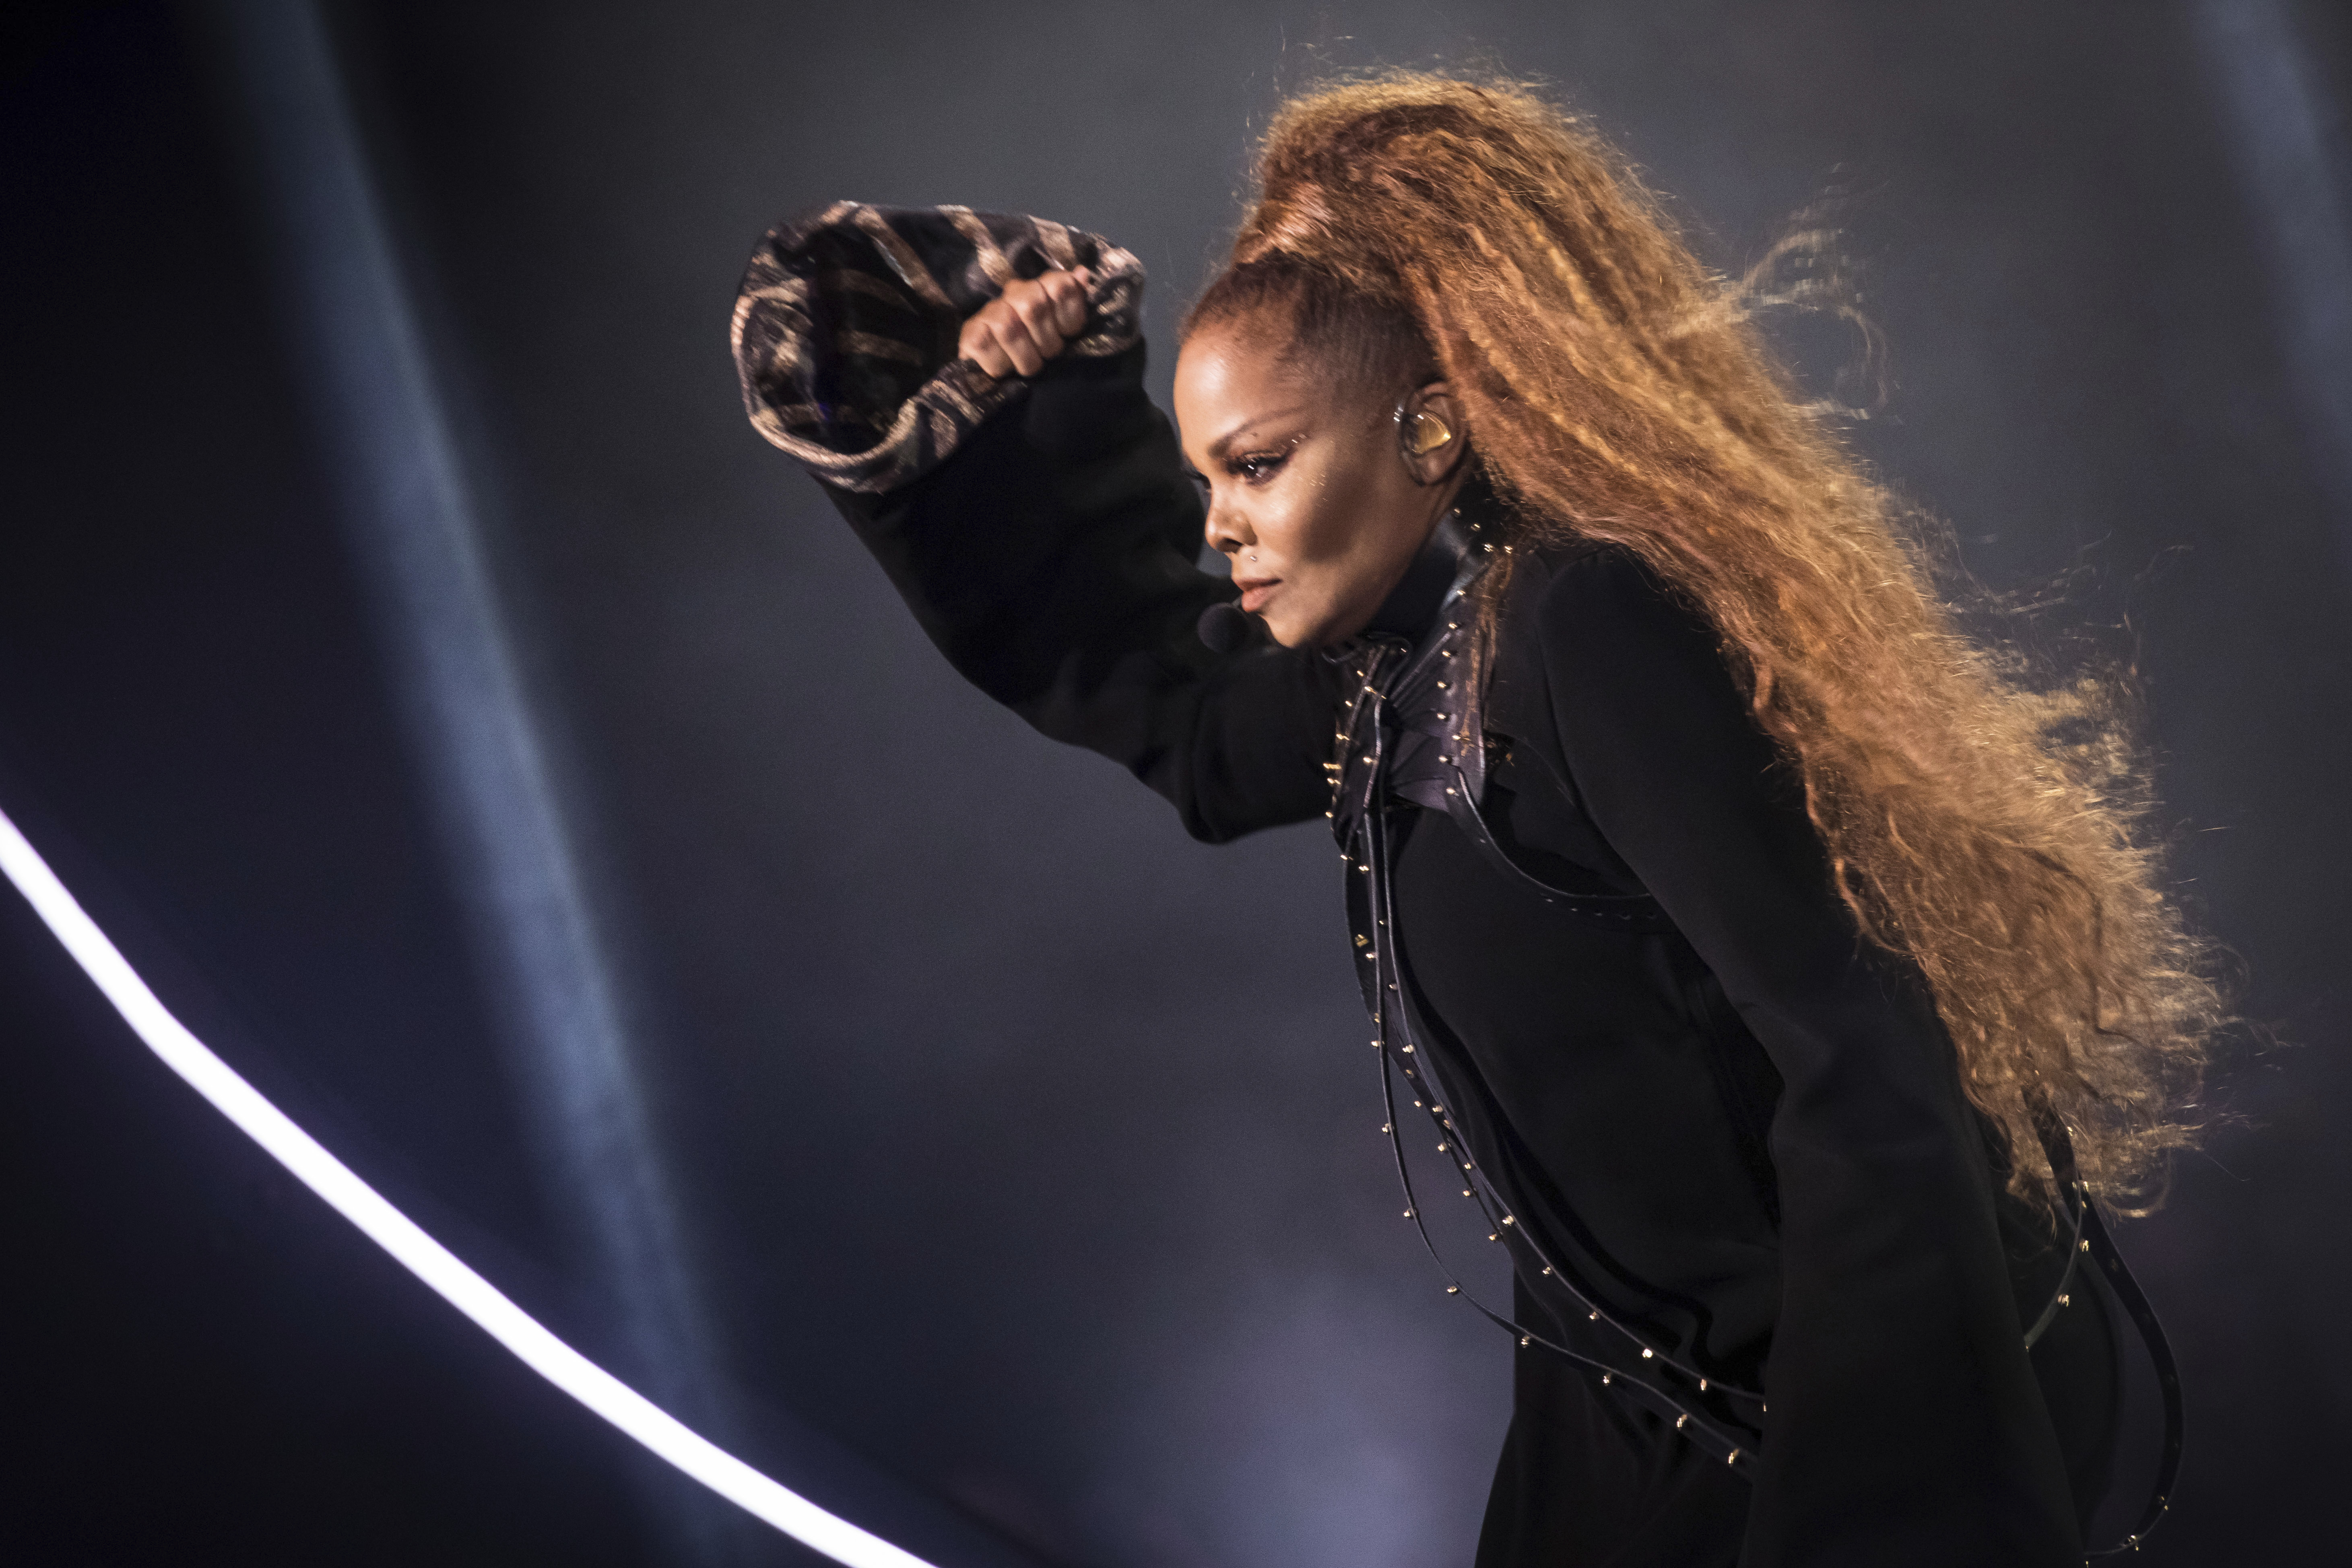 Janet Jackson is one of the artists featured in Lesley Chow's book "You’re History: The Twelve Strangest Women in Music."